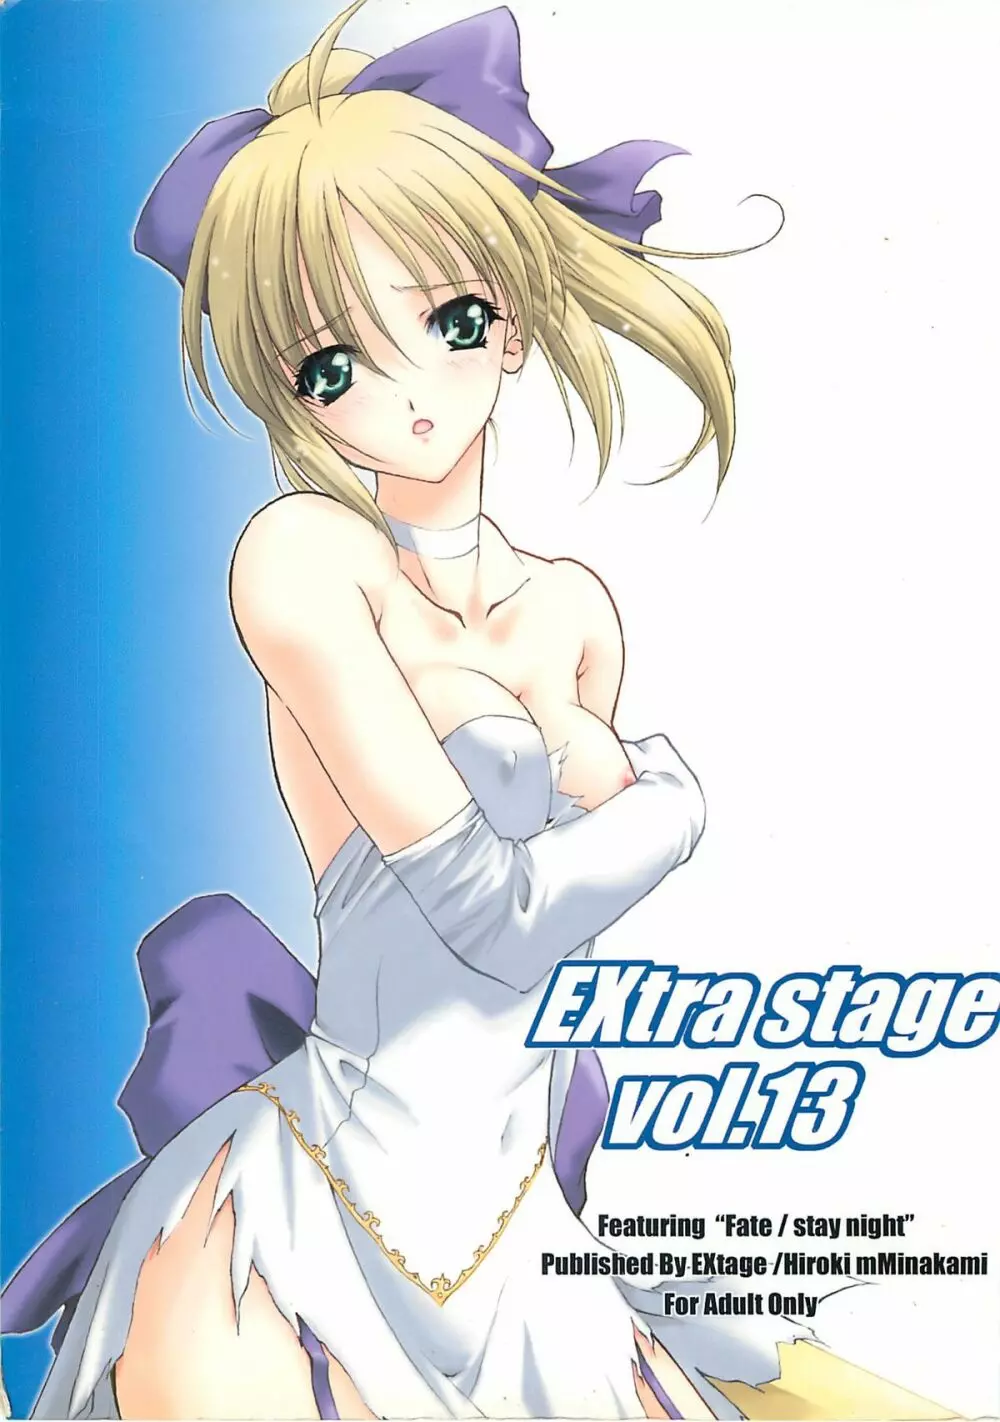 EXtra stage vol.13